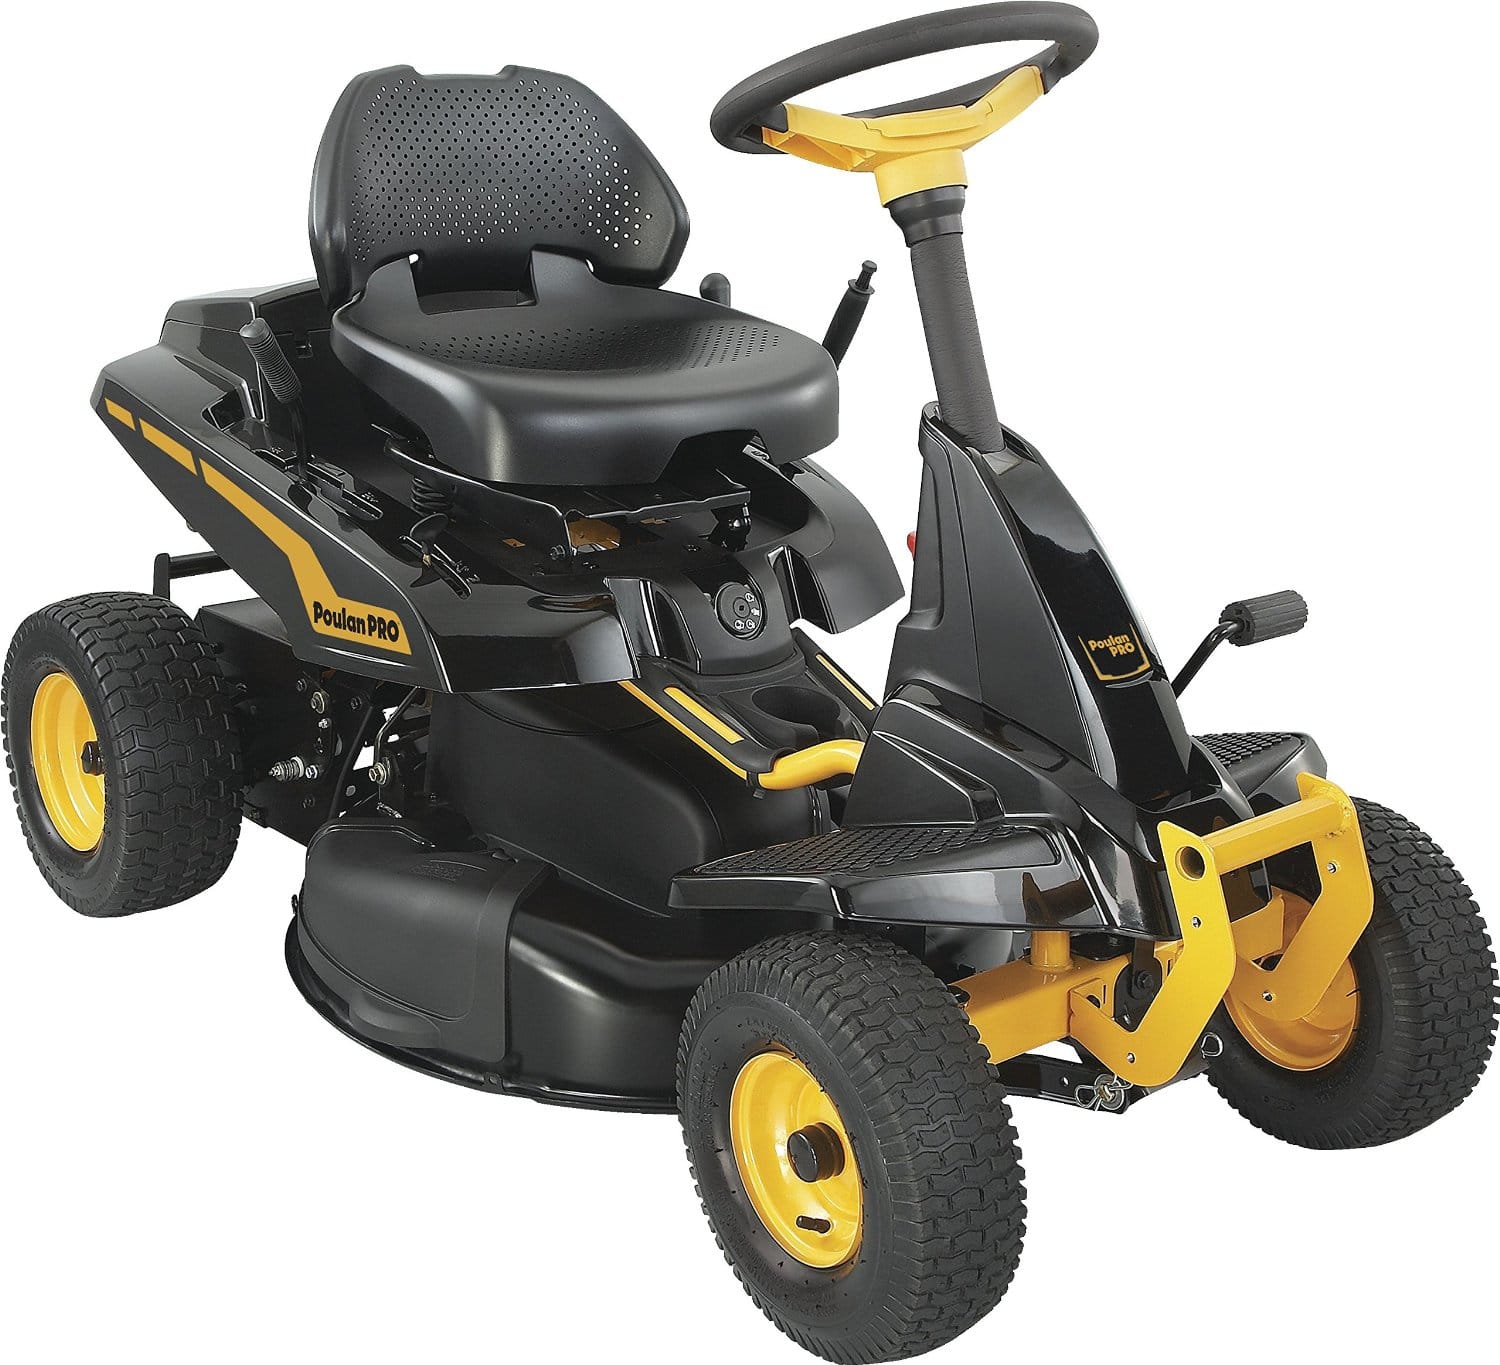 10 Best Riding Lawn Mowers Reviews Of 2016